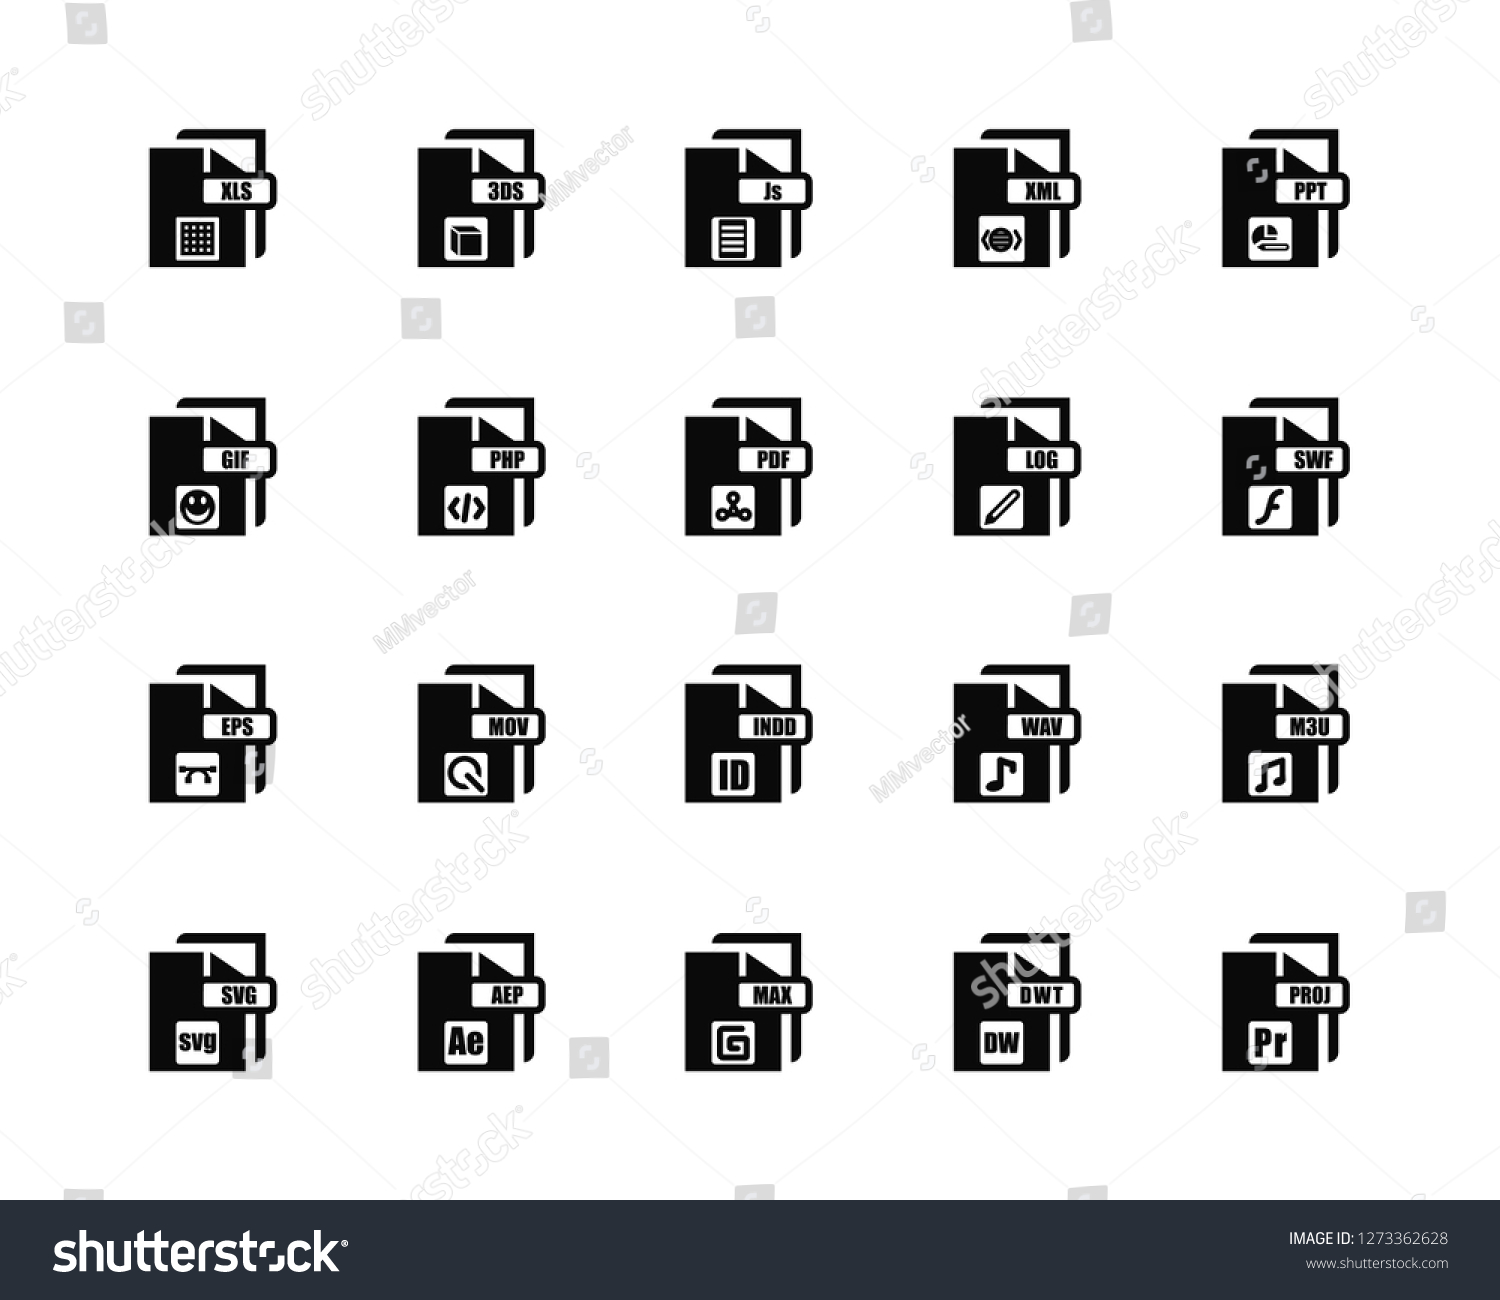 SVG of Vector Illustration Of 20 Icons. Editable Pack Xls, DW, Max, AE, Svg, Ppt, Log, Indd, Eps, Php, Js svg